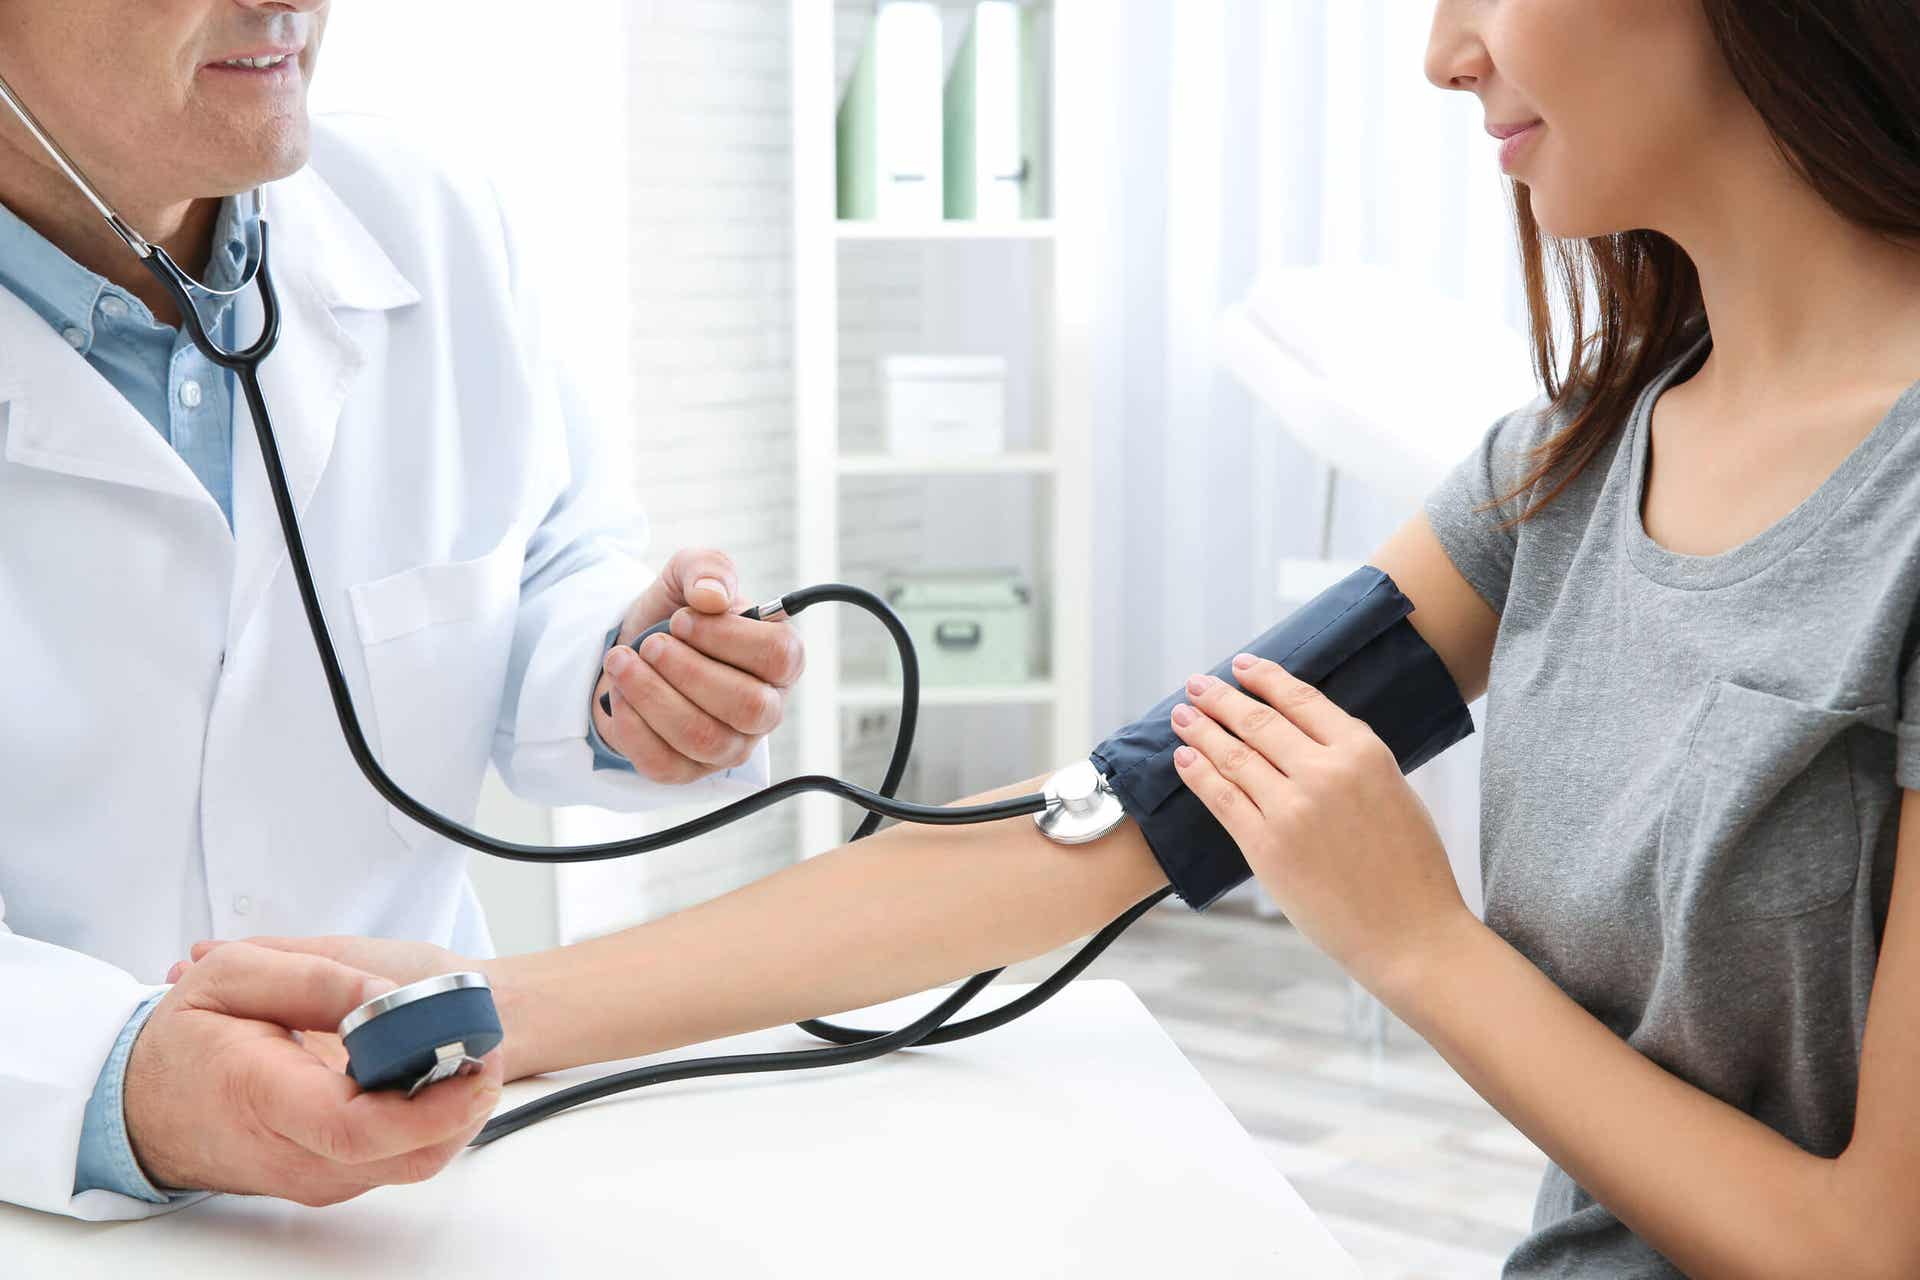 A doctor taking a woman's blood pressure.